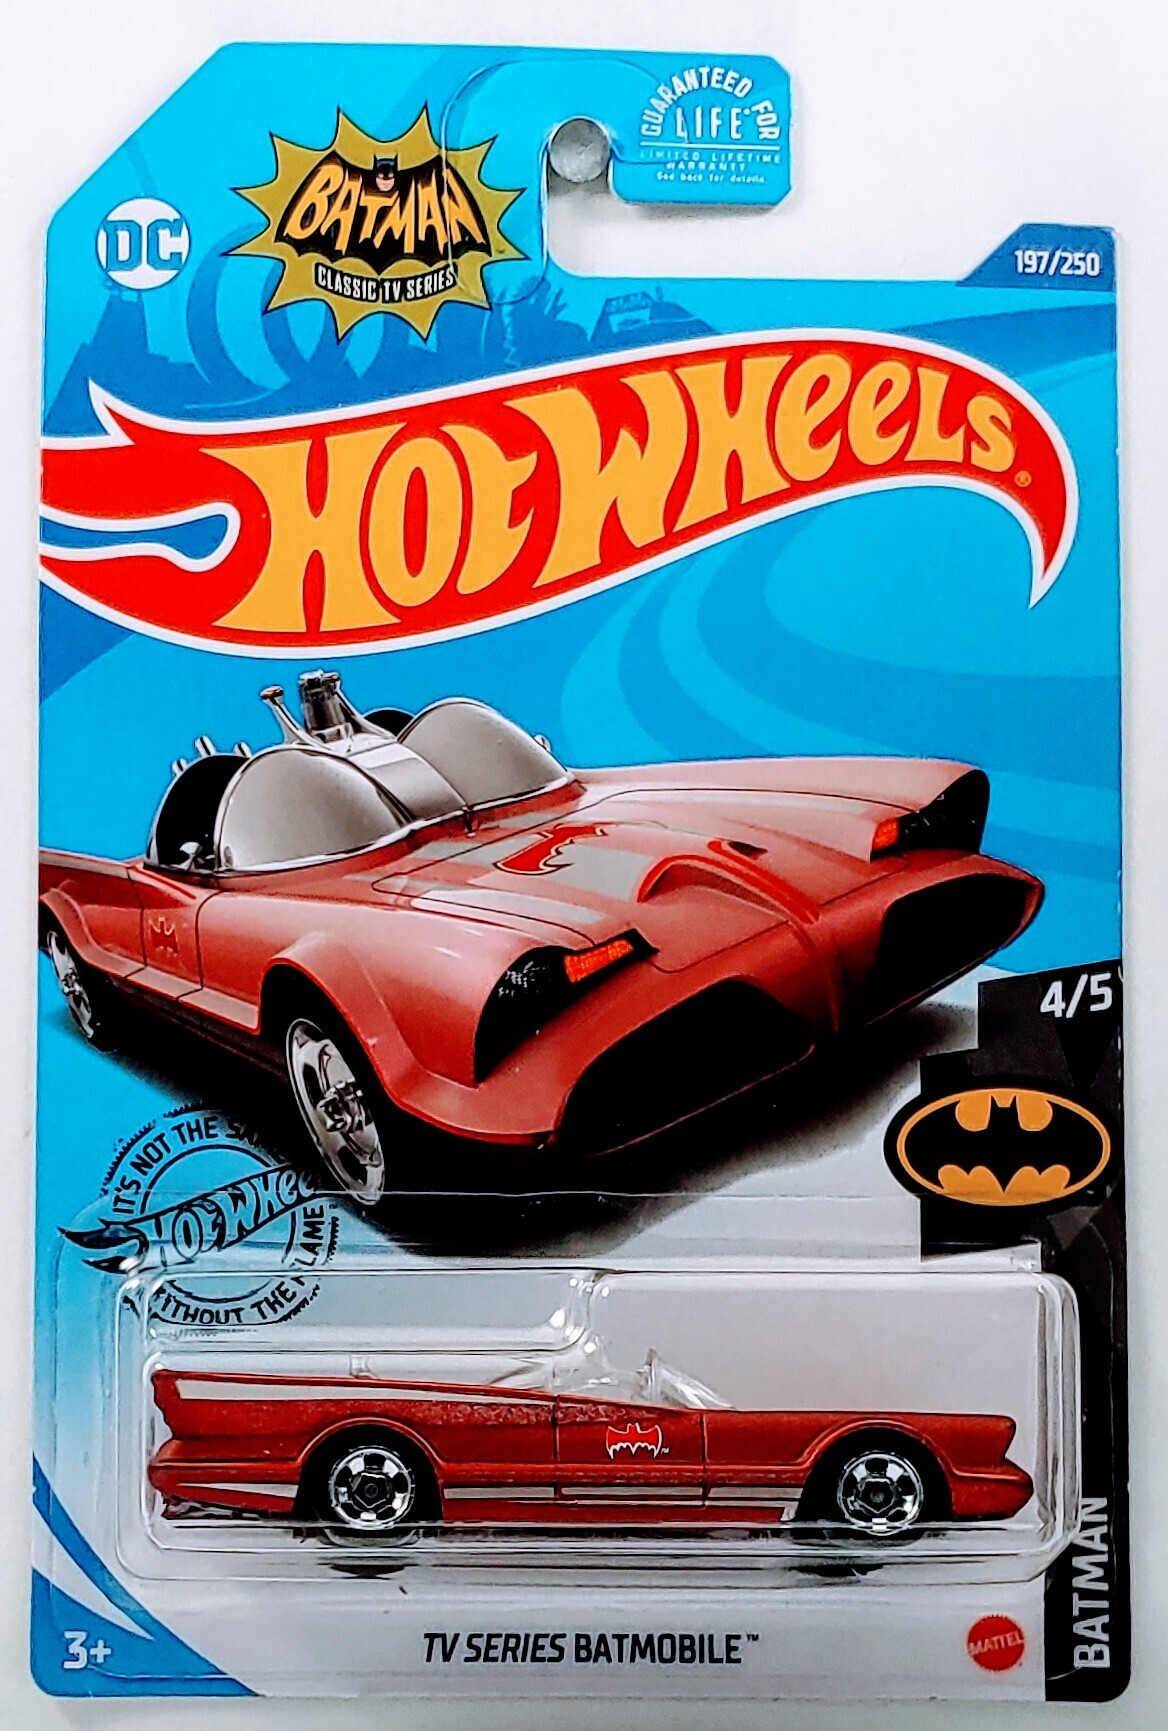 2020 HOT WHEELS CLASSIC TV SERIES BATMOBILE LOT OF 6 #197/250 NEW in Package 